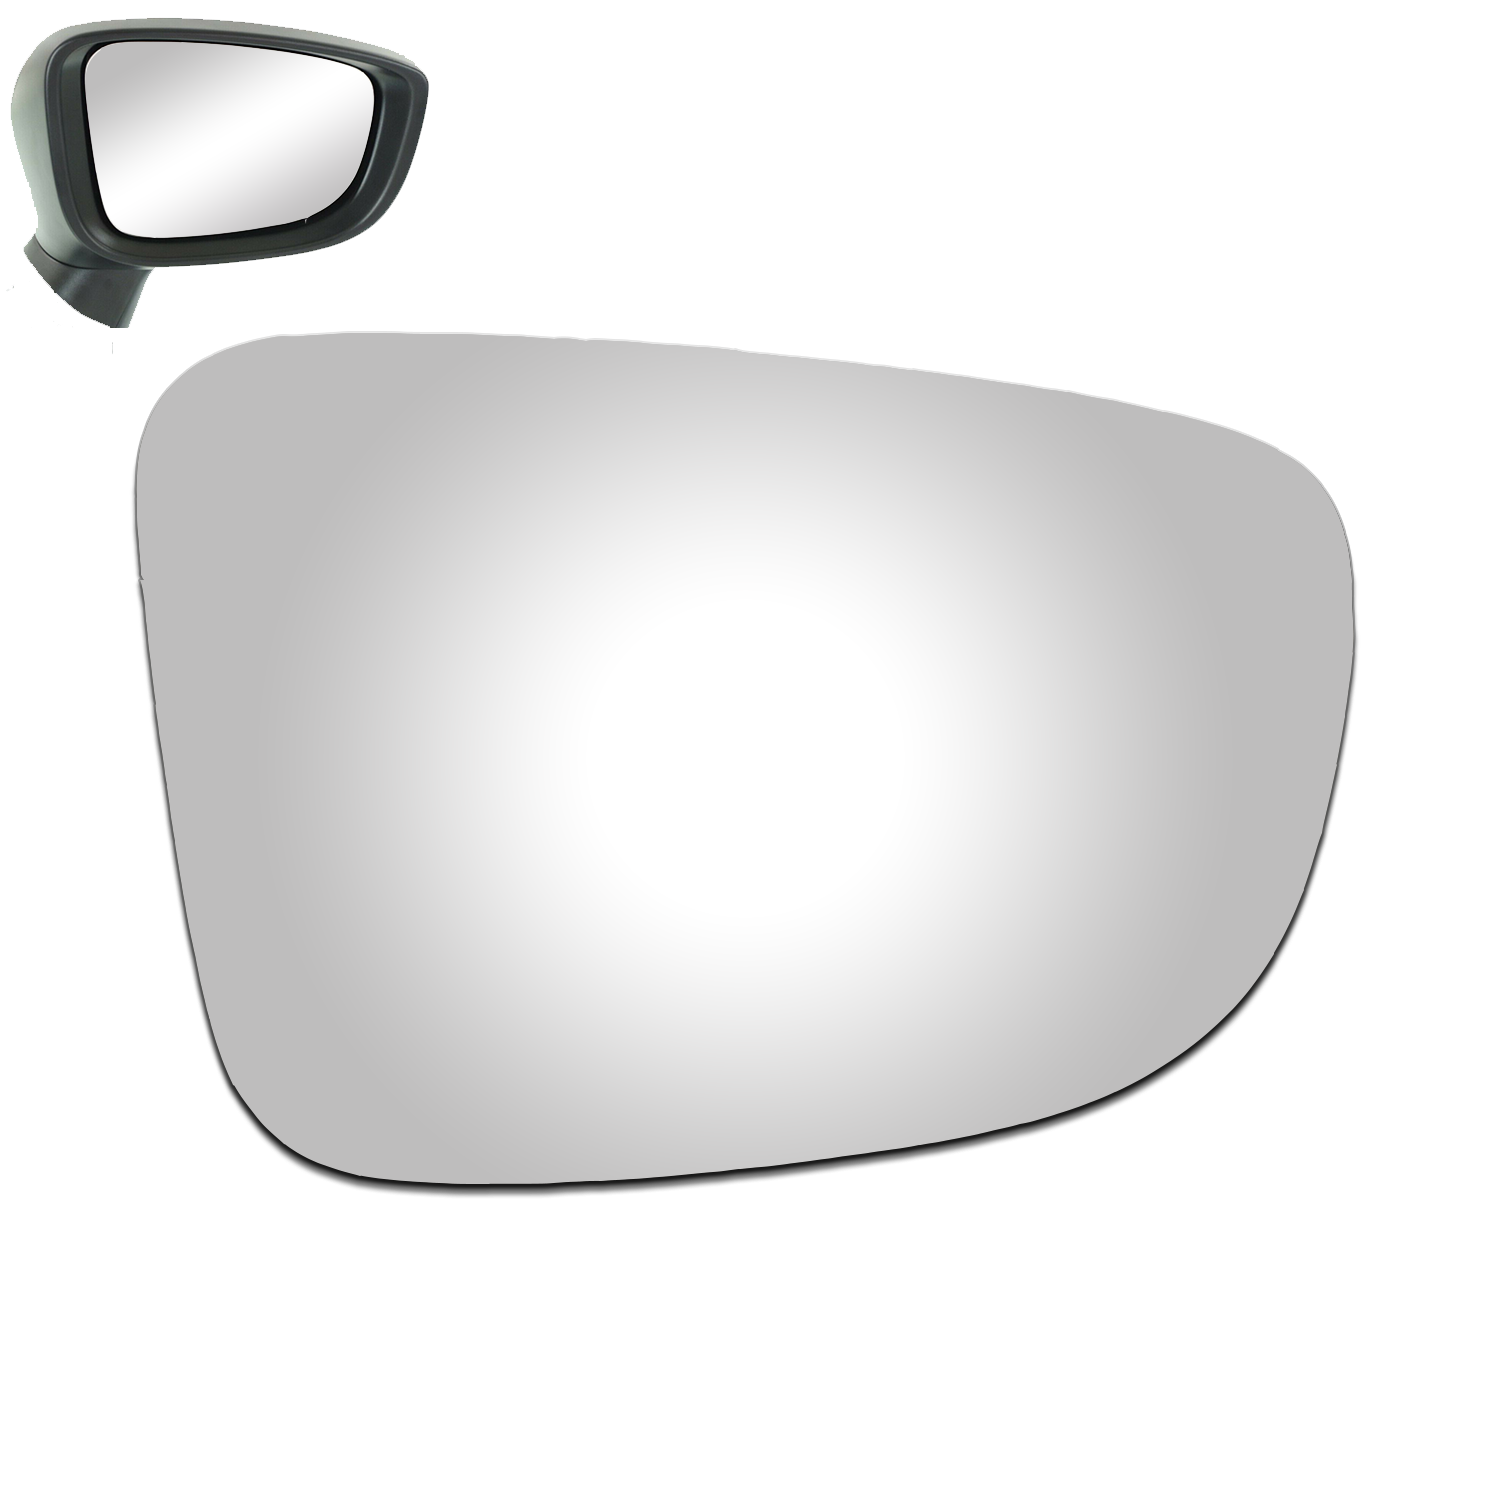 WLLW Replacement Mirror Glass for 2014-2018 Mazda 3/2016 Scion iA/2017-2018 Toyota Yaris iA, Driver Left Side LH/Passenger Right Side RH/The Both Sides Flat Convex M-0074